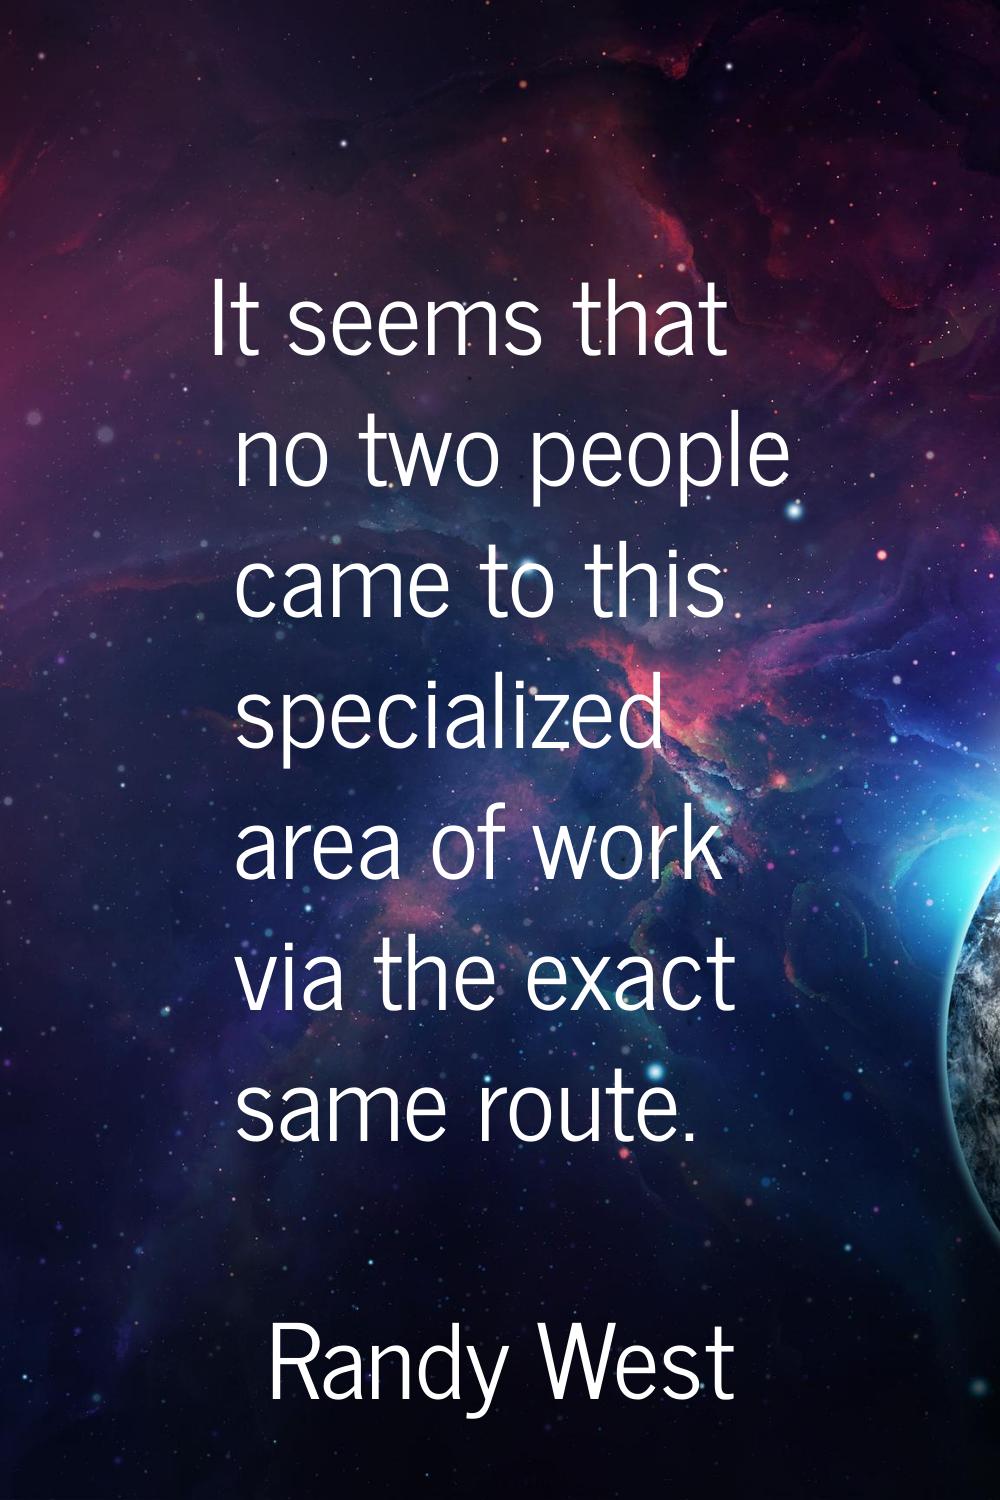 It seems that no two people came to this specialized area of work via the exact same route.